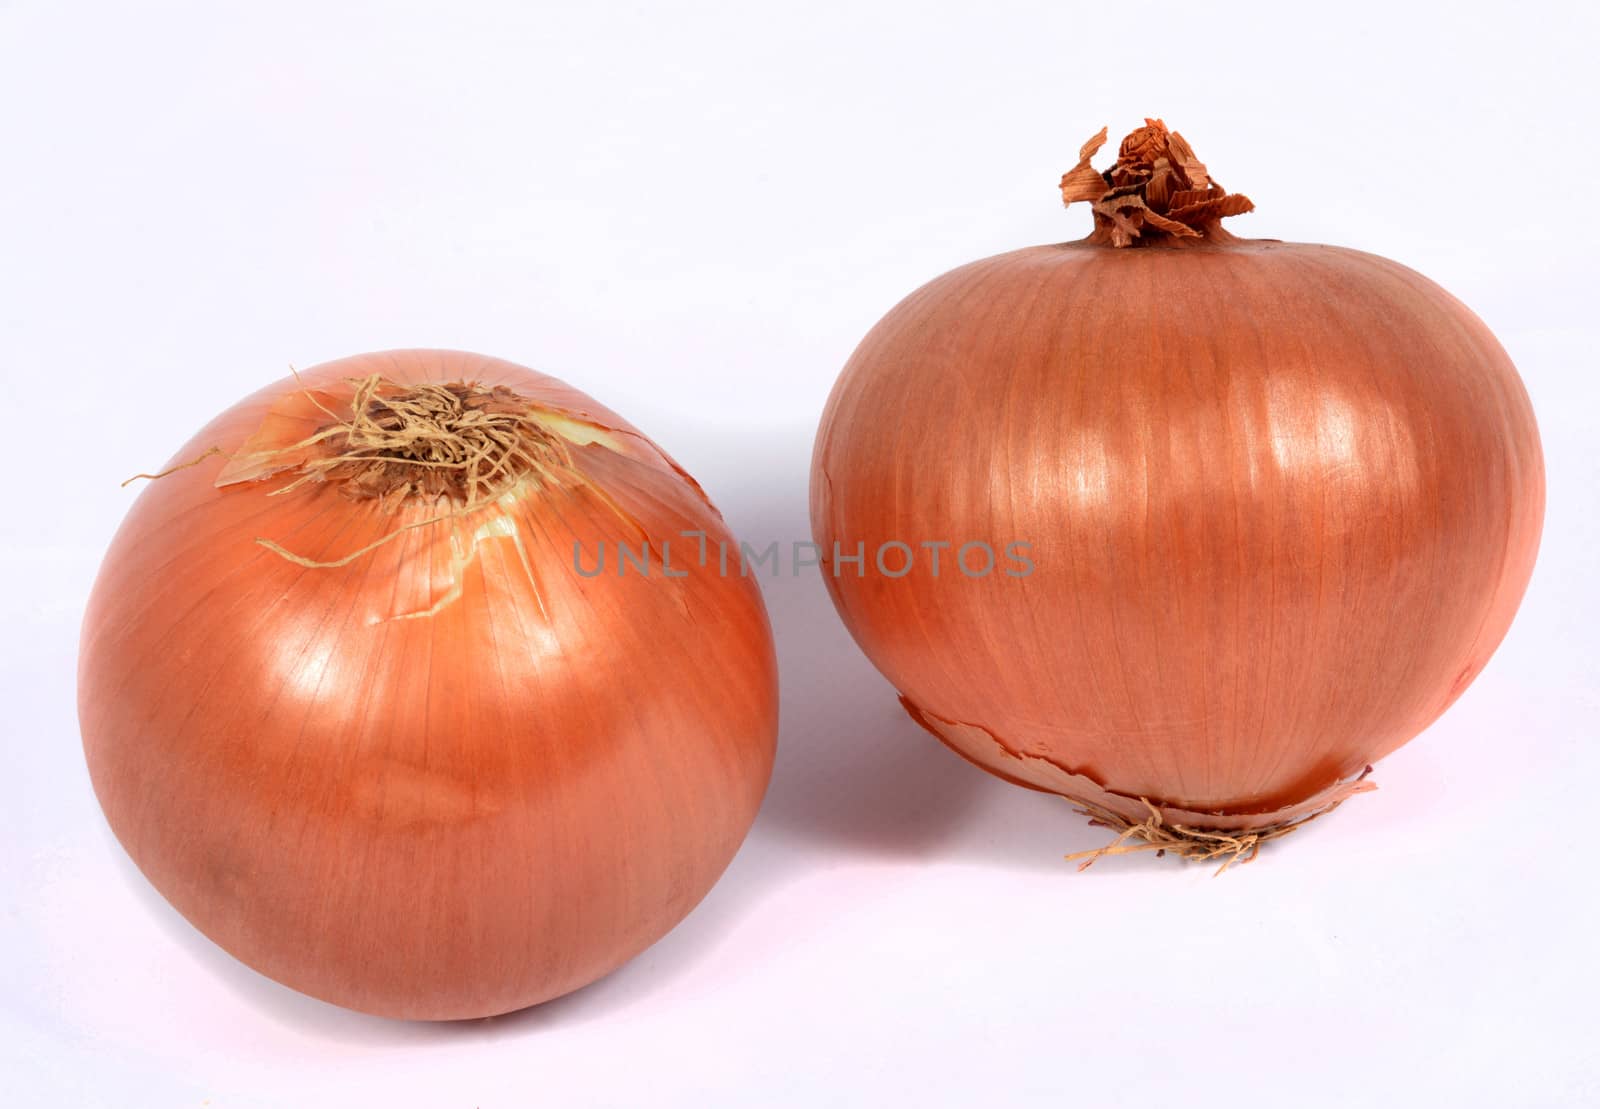  onions on the white background